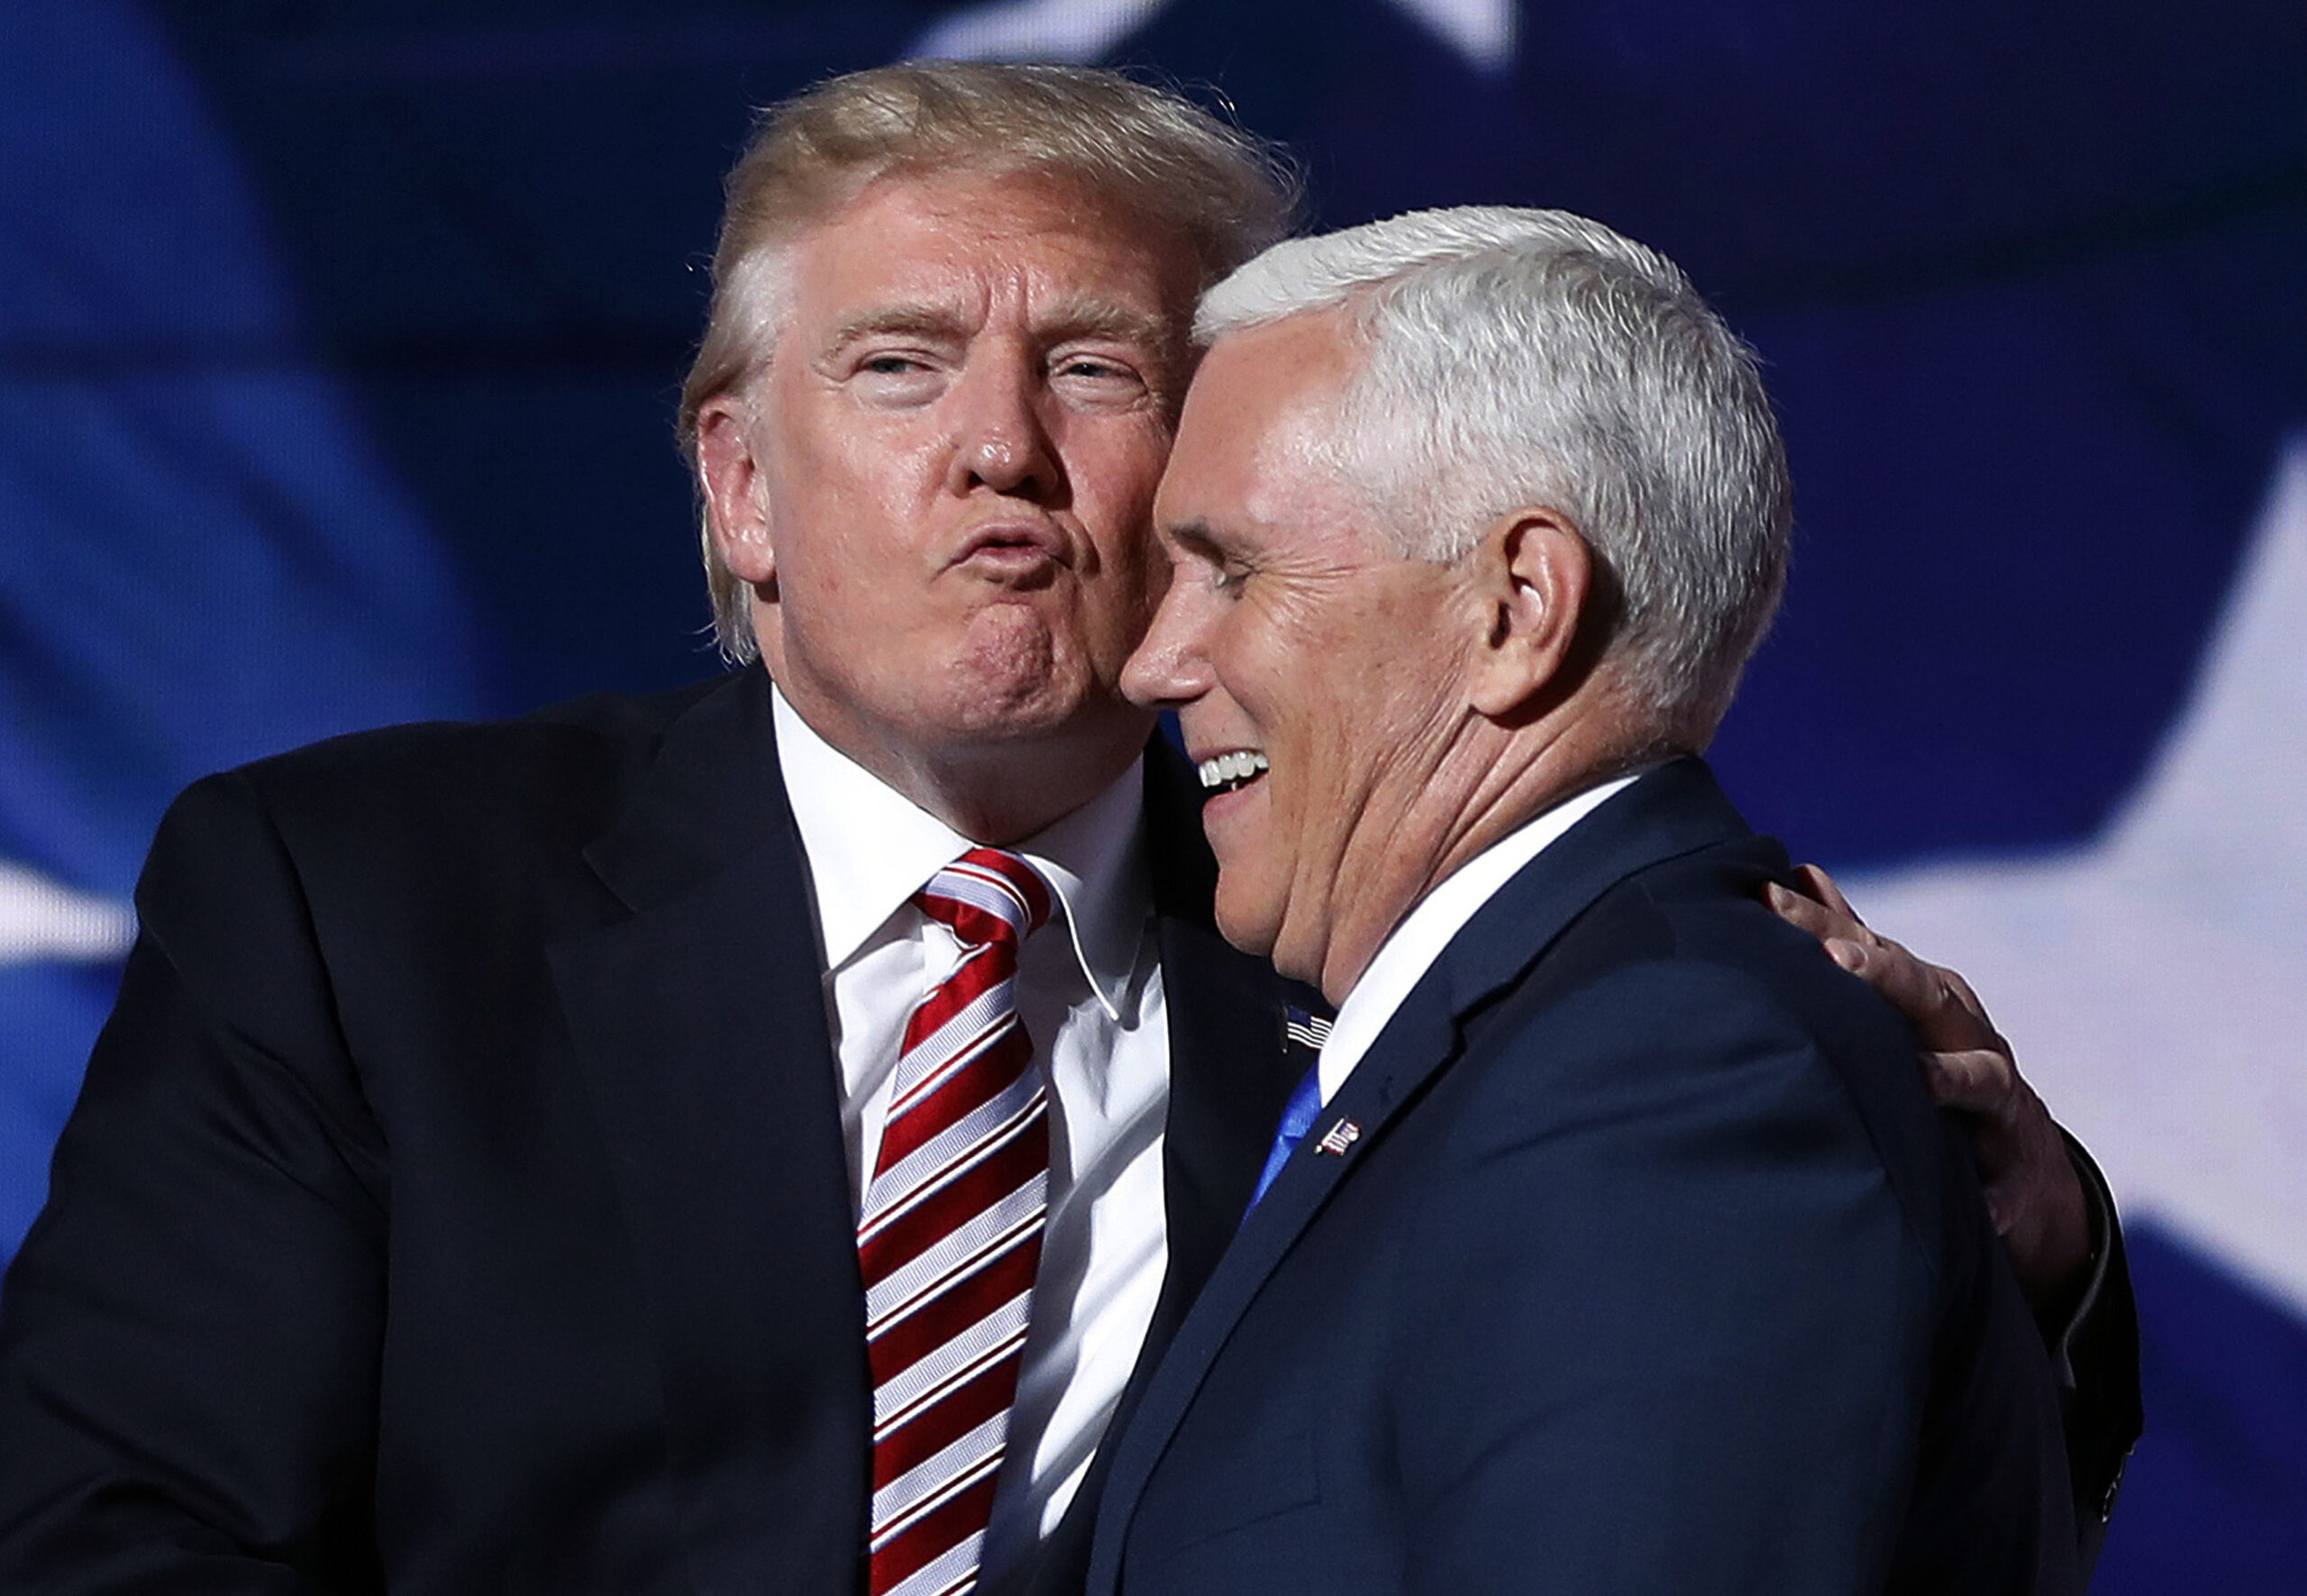 ‘He’s Delusional’: Trump Rages At ‘Liddle’ Mike Pence On Truth Social For Backing His January 6th Indictment, Claims He Turned To The ‘Dark Side’